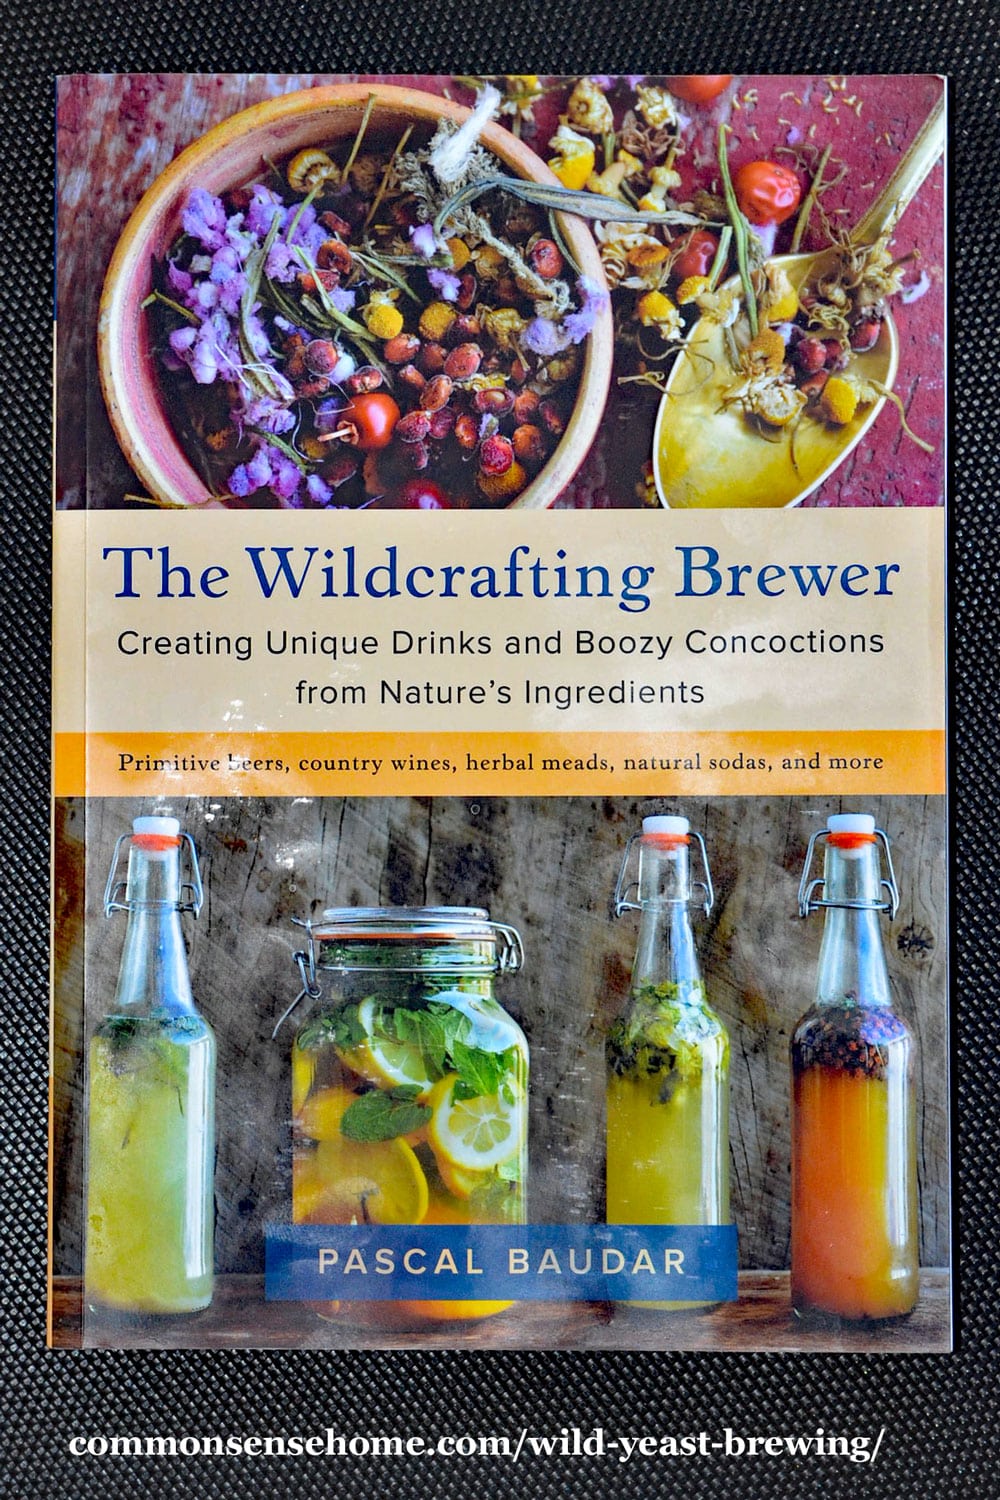 The Wildcrafting Brewer book